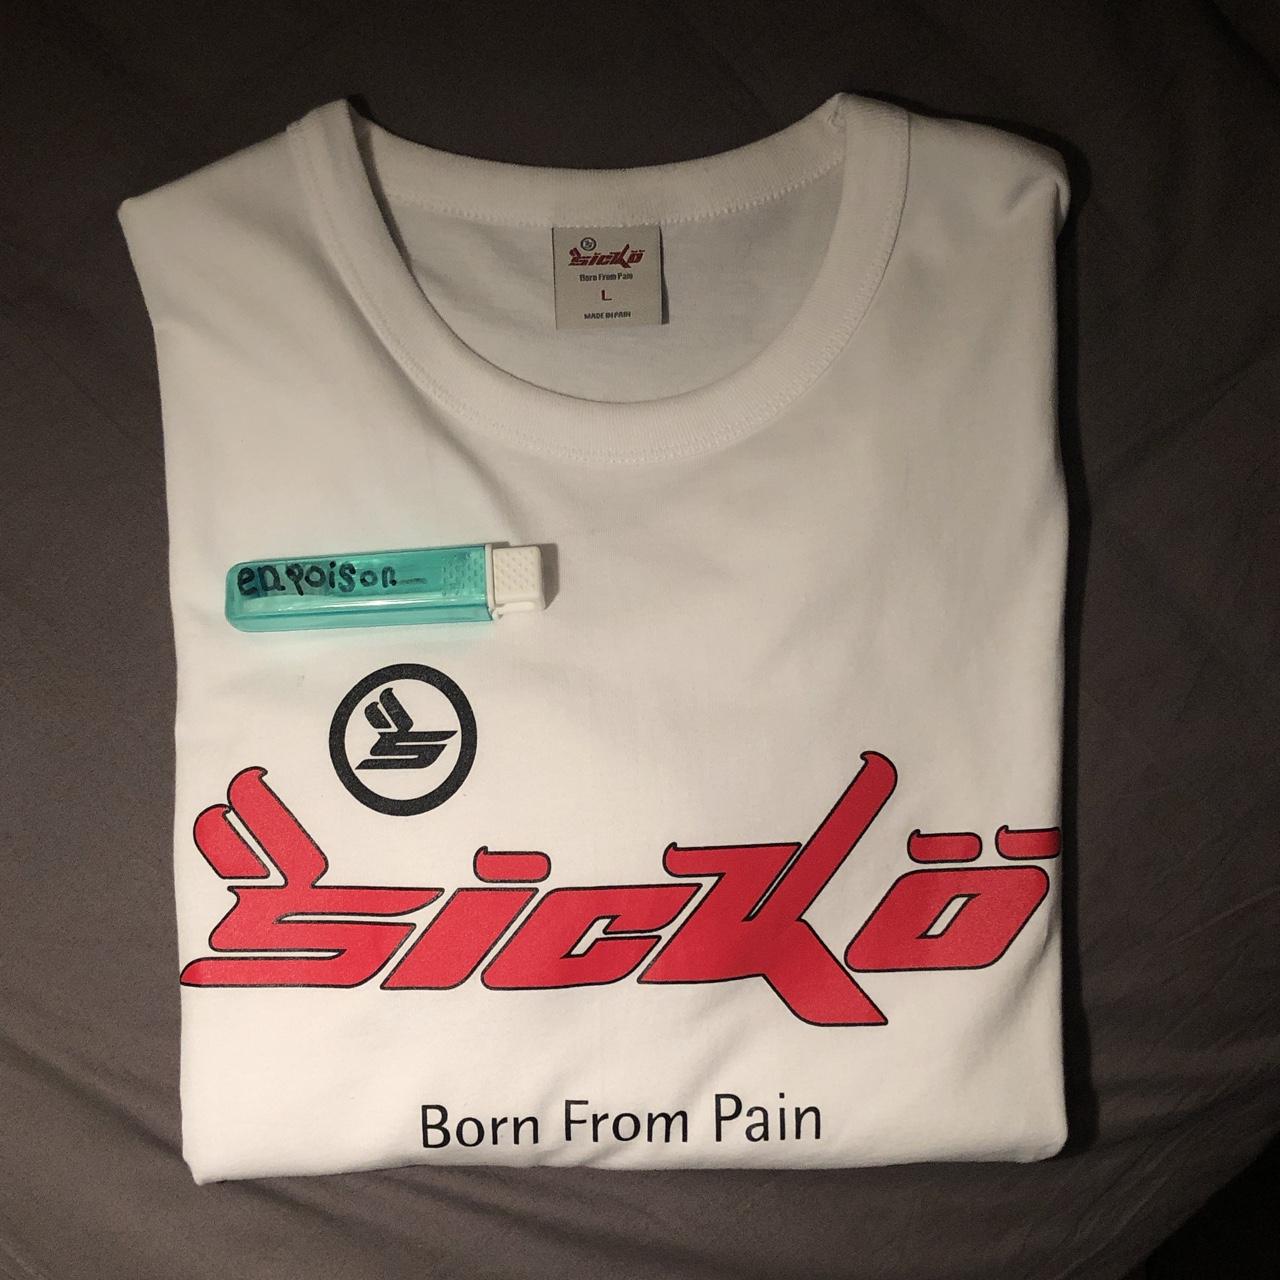 SICKÖ sicko ian connor t shirt tee, Size L , perfect